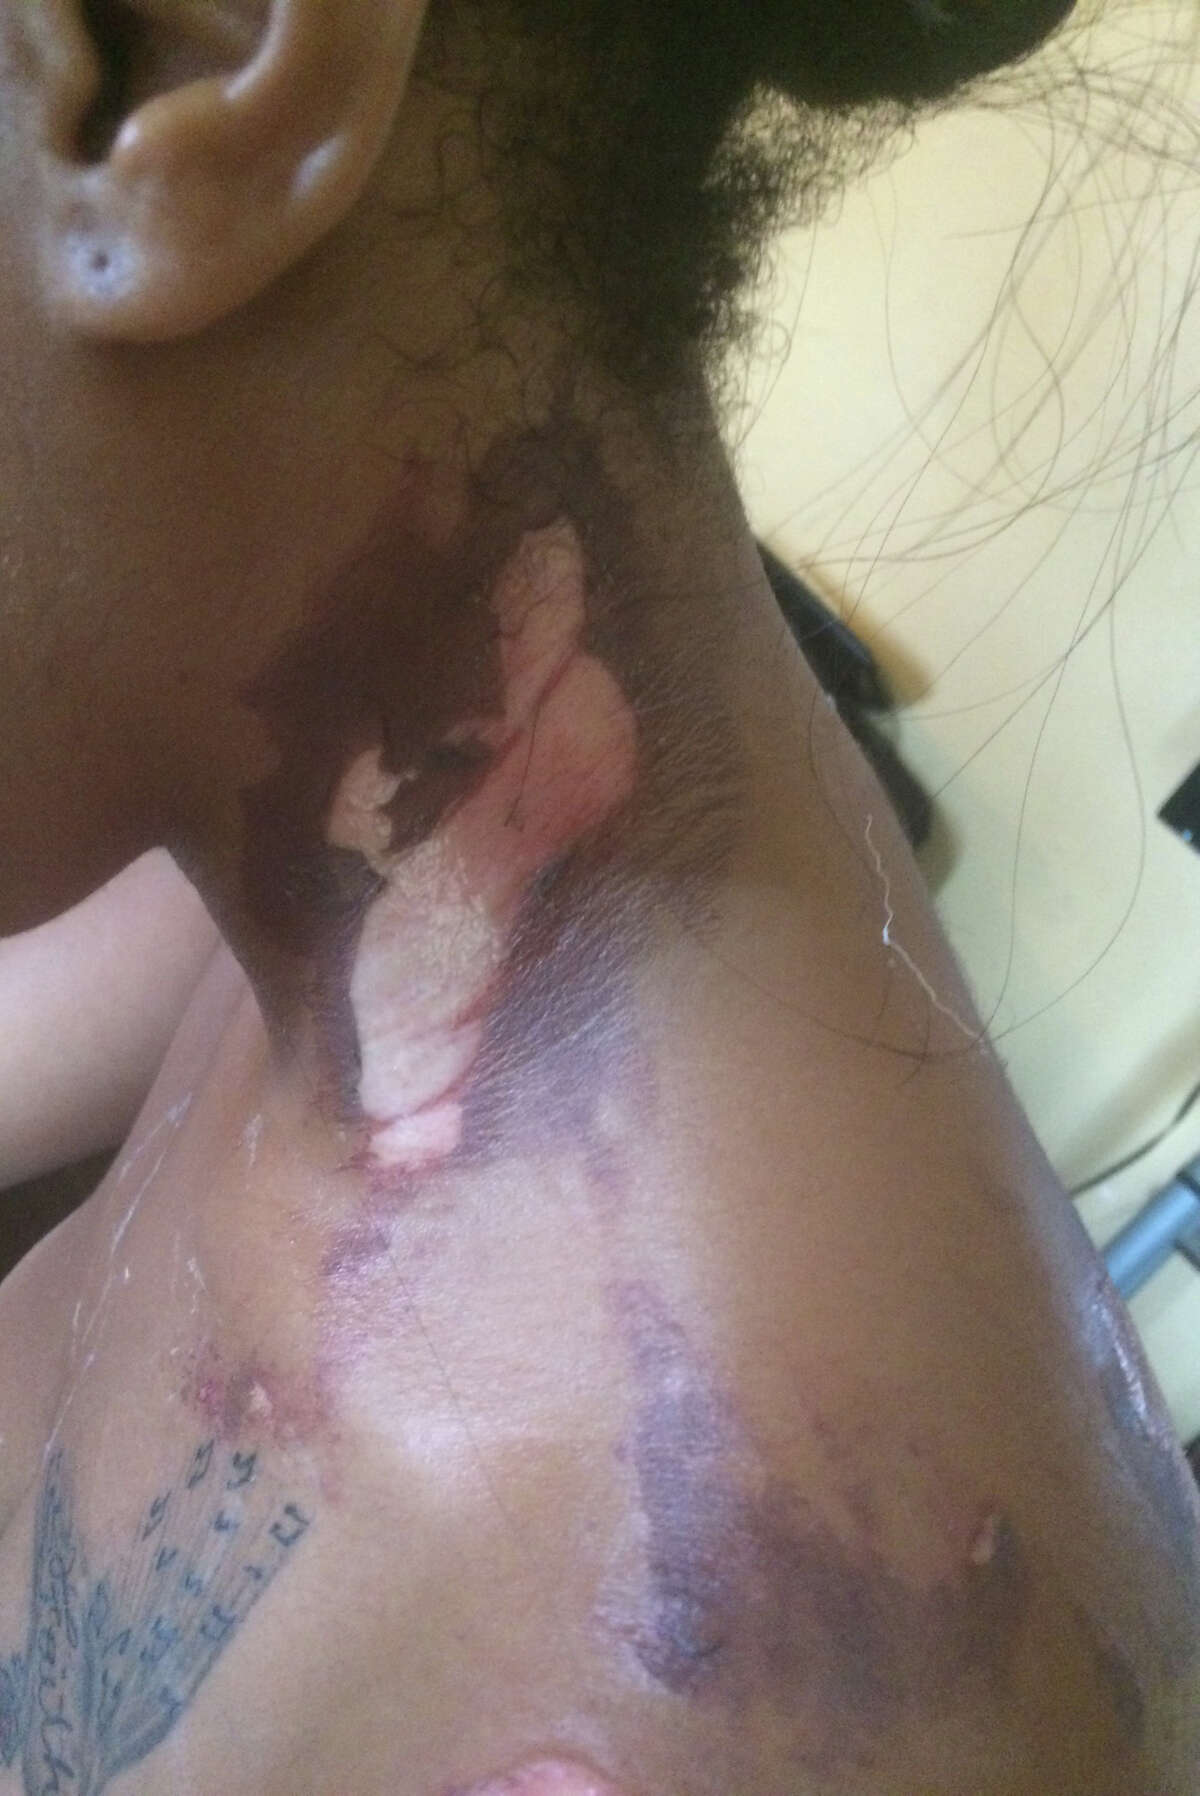 Haronisha Alexander, 19, alleges that she and her boyfriend, Johnson Moore, were burned with hot oil by Taco Bell employees at the restaurant located in the 3100 block of the South Loop.